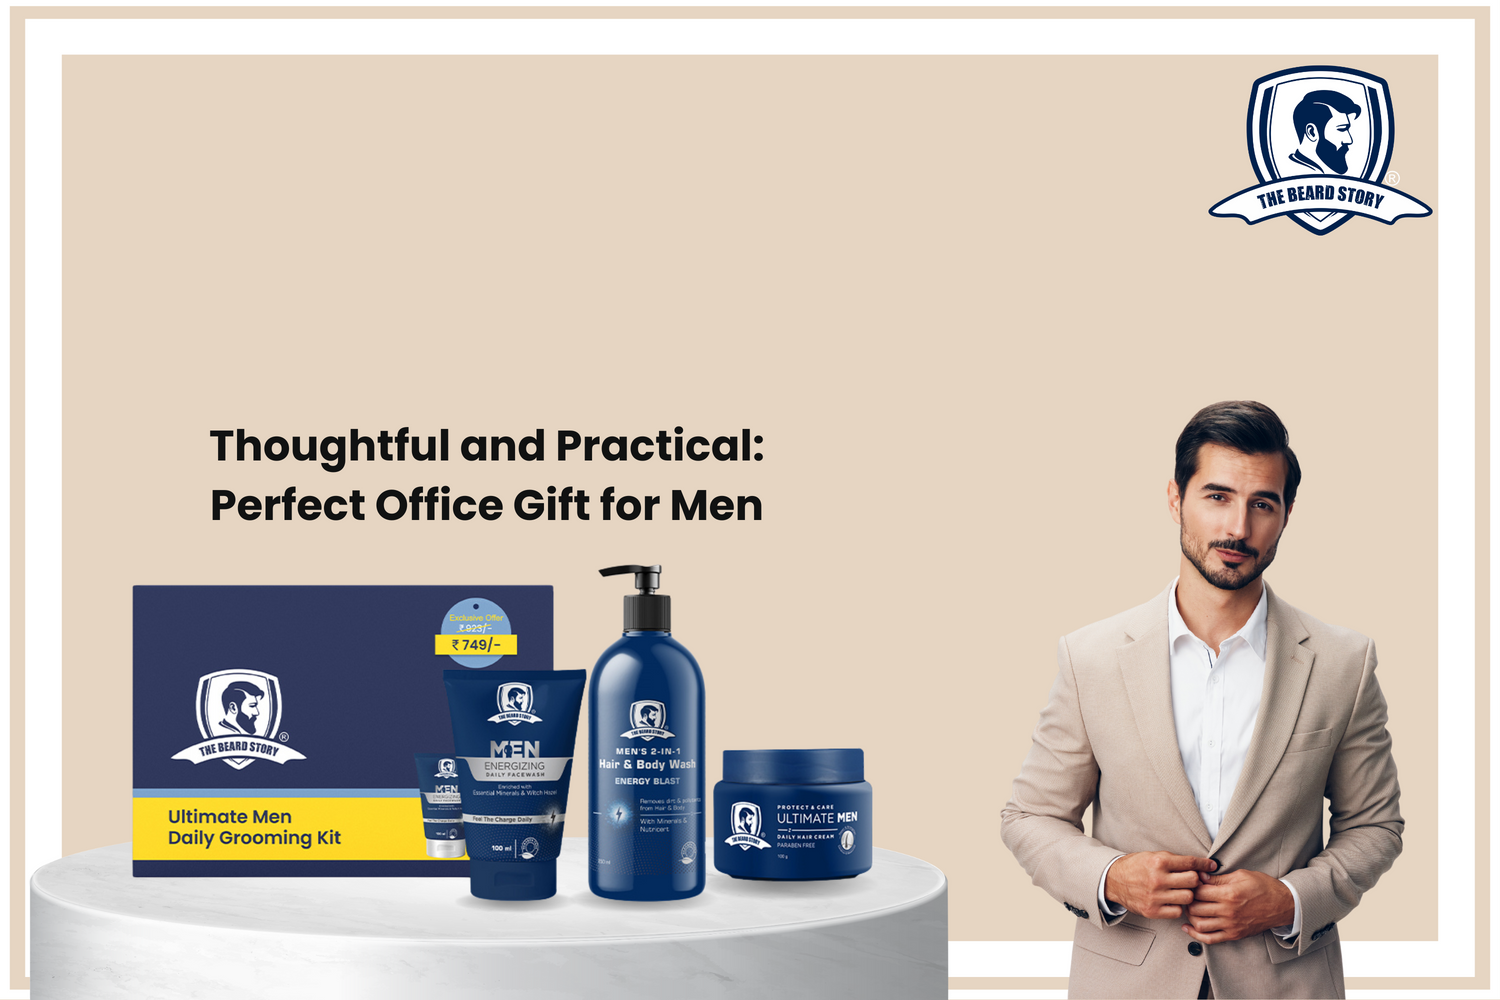 Thoughtful and Practical: Perfect Office Gift for Men